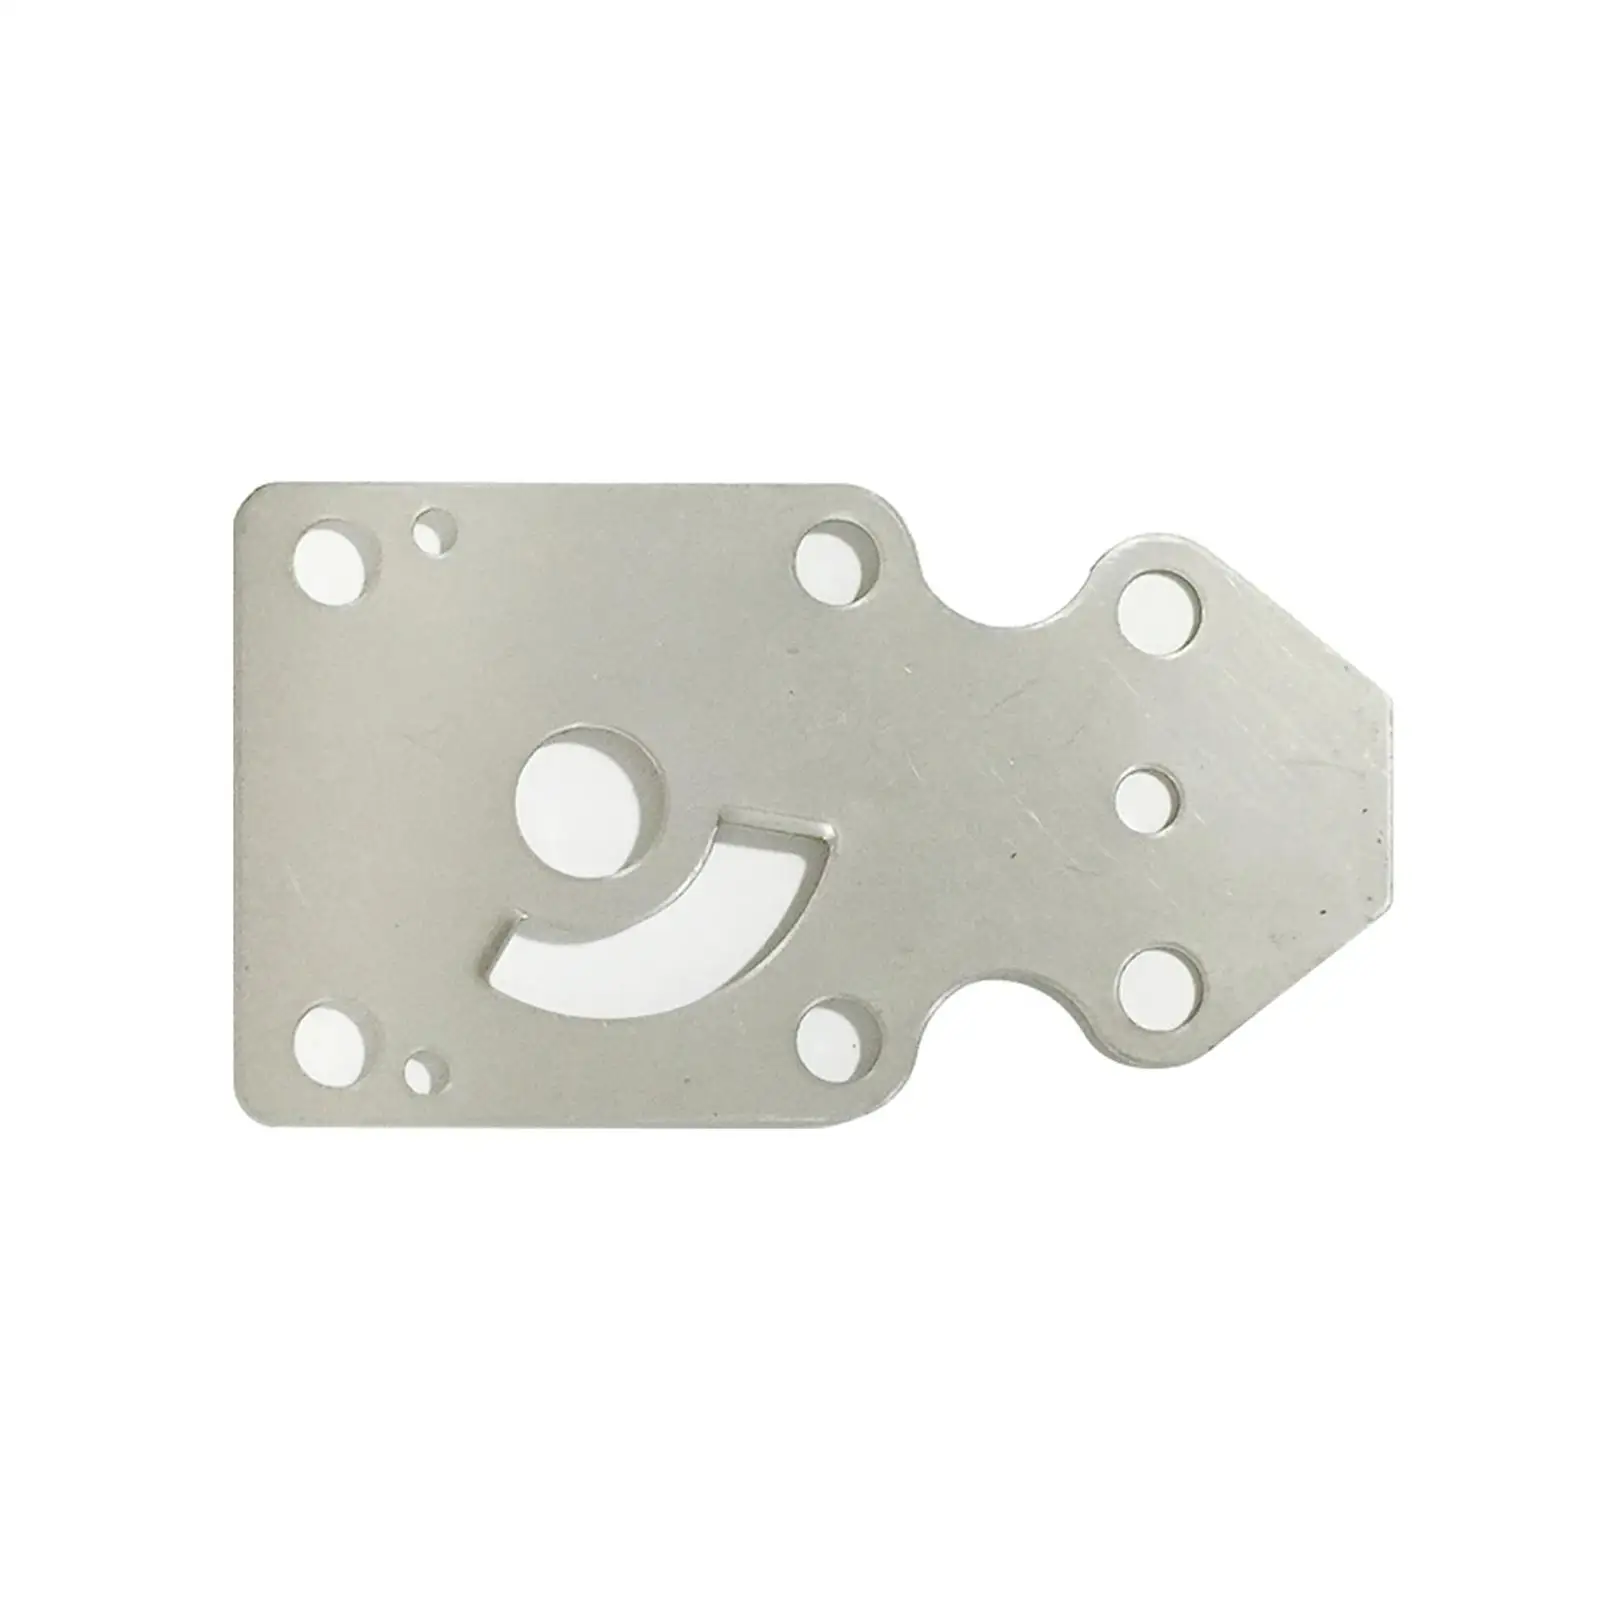 Outer Plate 63V-44323-00 Repair Part for Yamaha Outboard Marine Engine